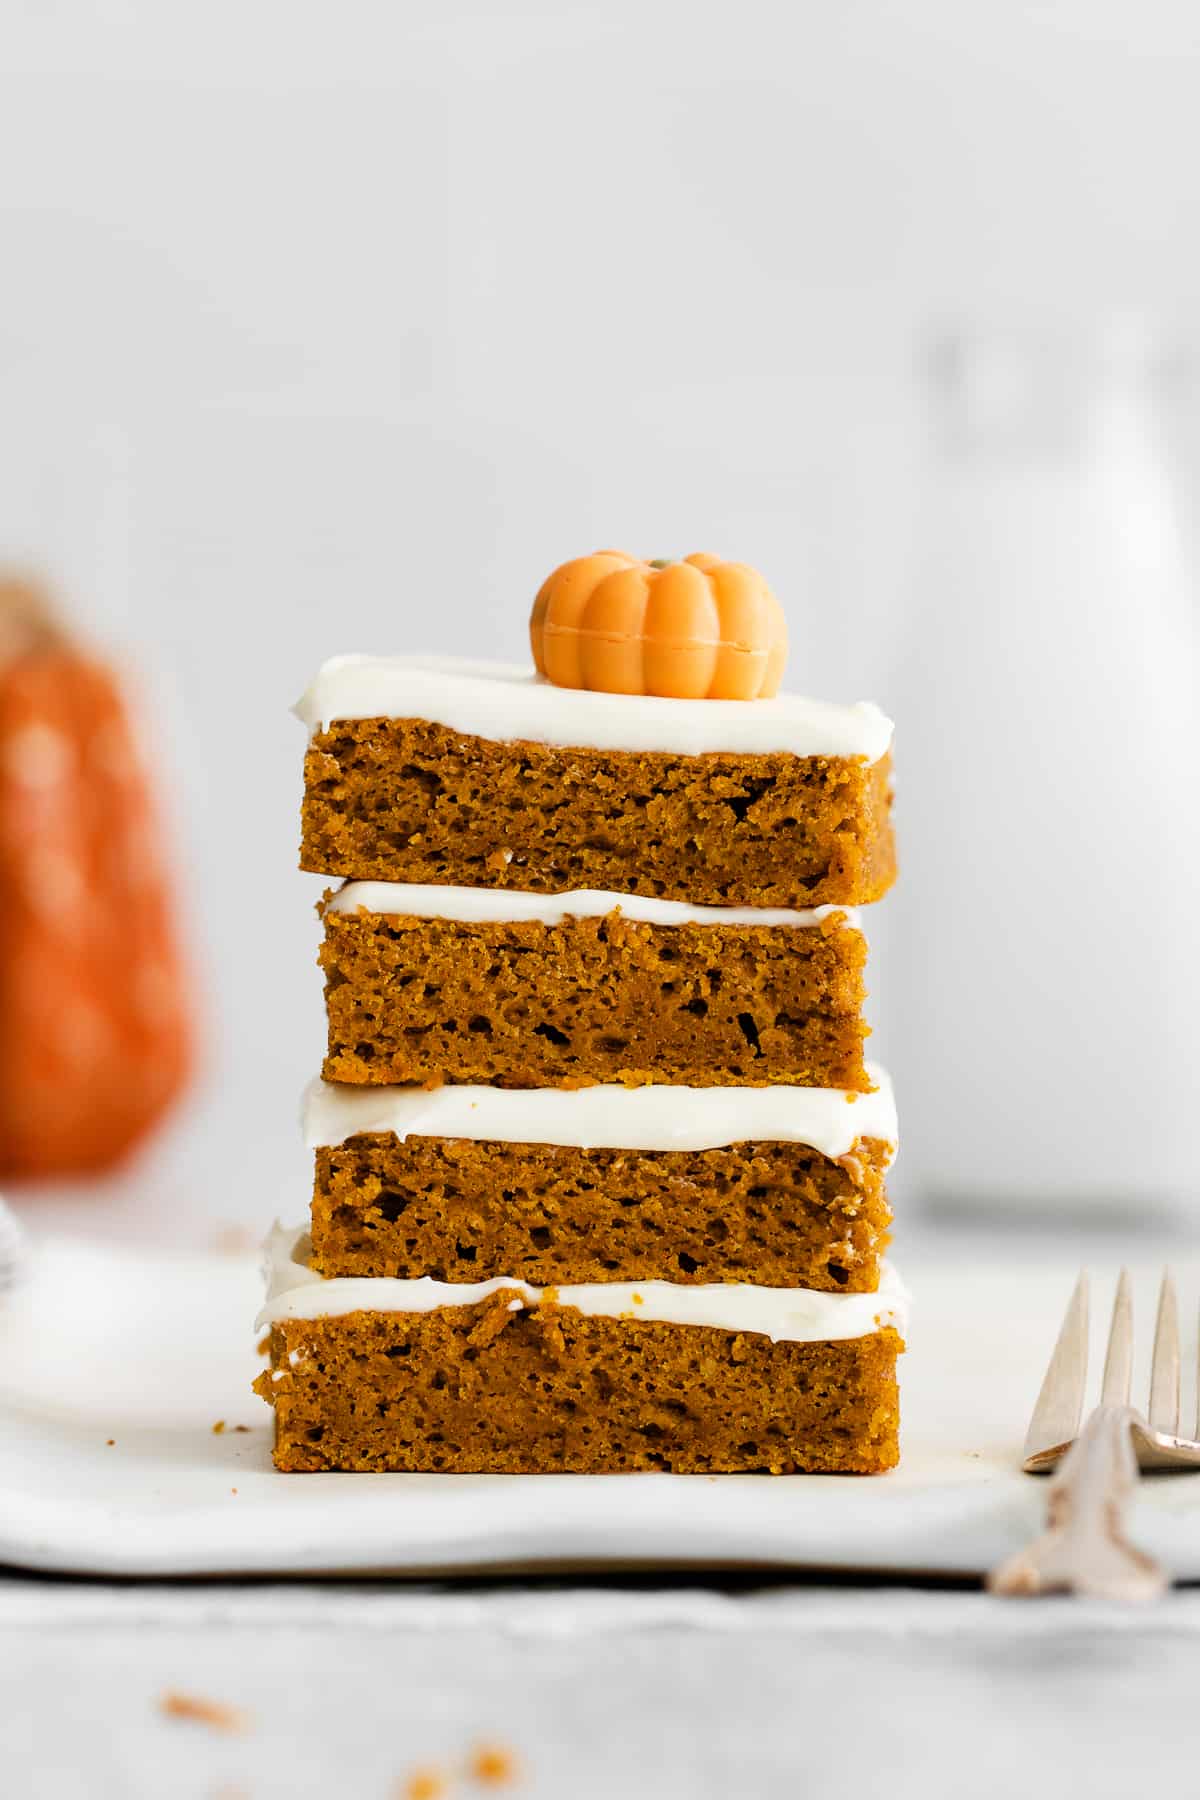 Pumpkin bars stacked 4 high on a plate.